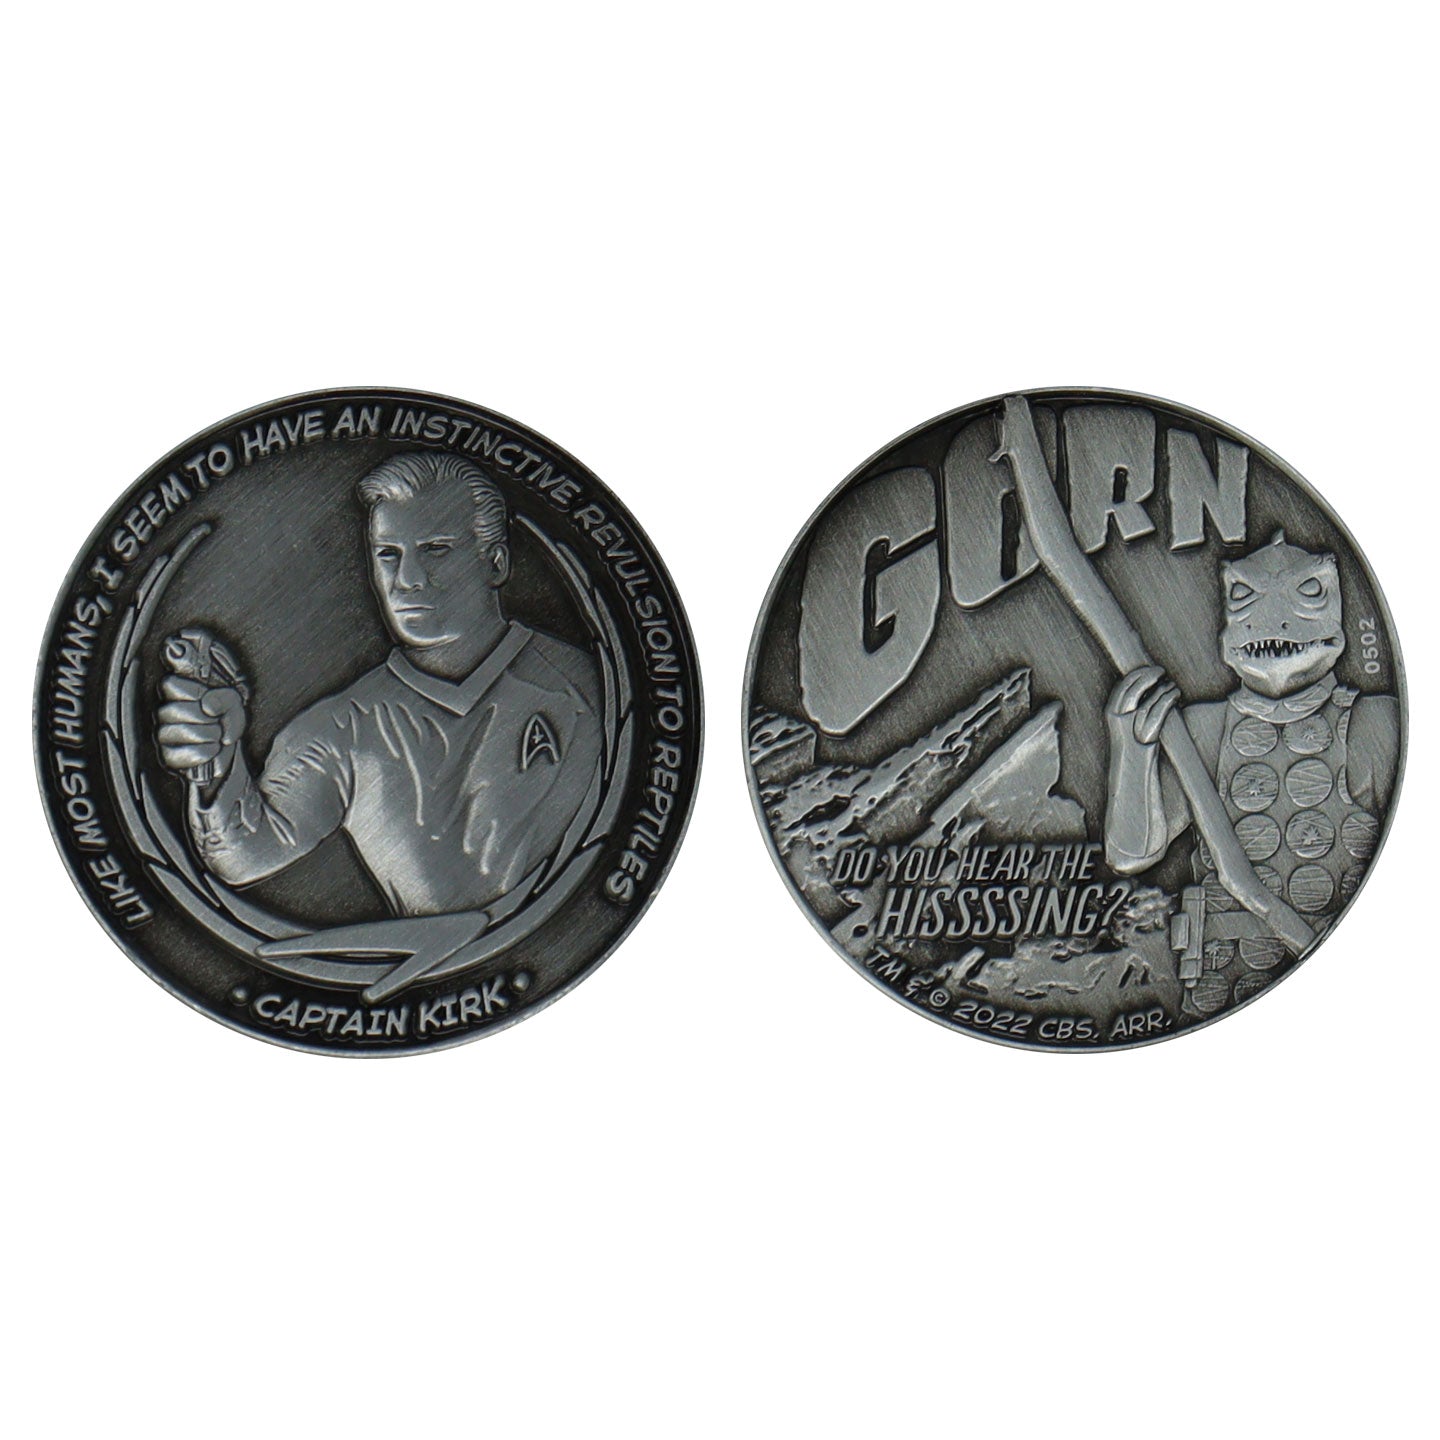 Star Trek Limited Edition Captain Kirk and Gorn Collectible Coin